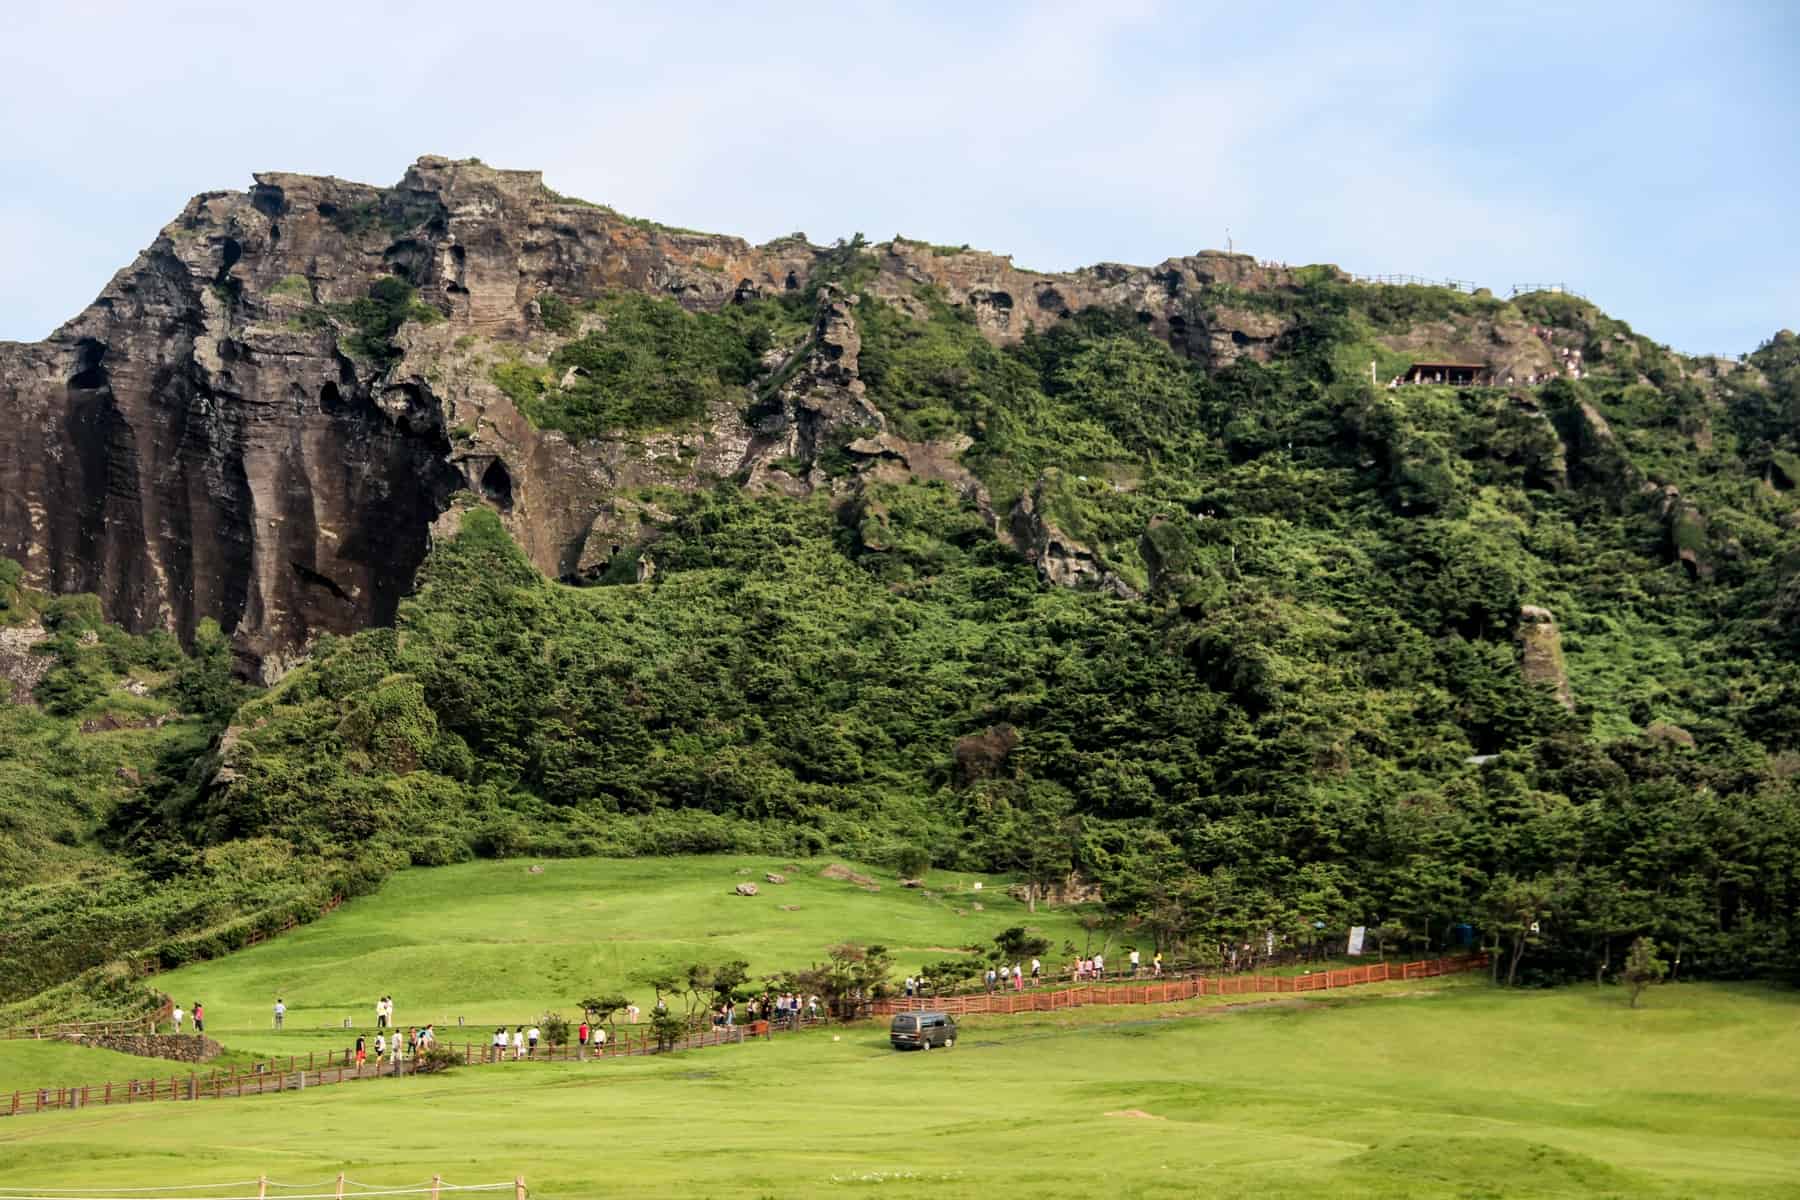 A close up of the high volcanic mastiff of Seongsan ilchulbong Peak, surrounded by nrnight green grass - one of the main things to do in Jeju Island 